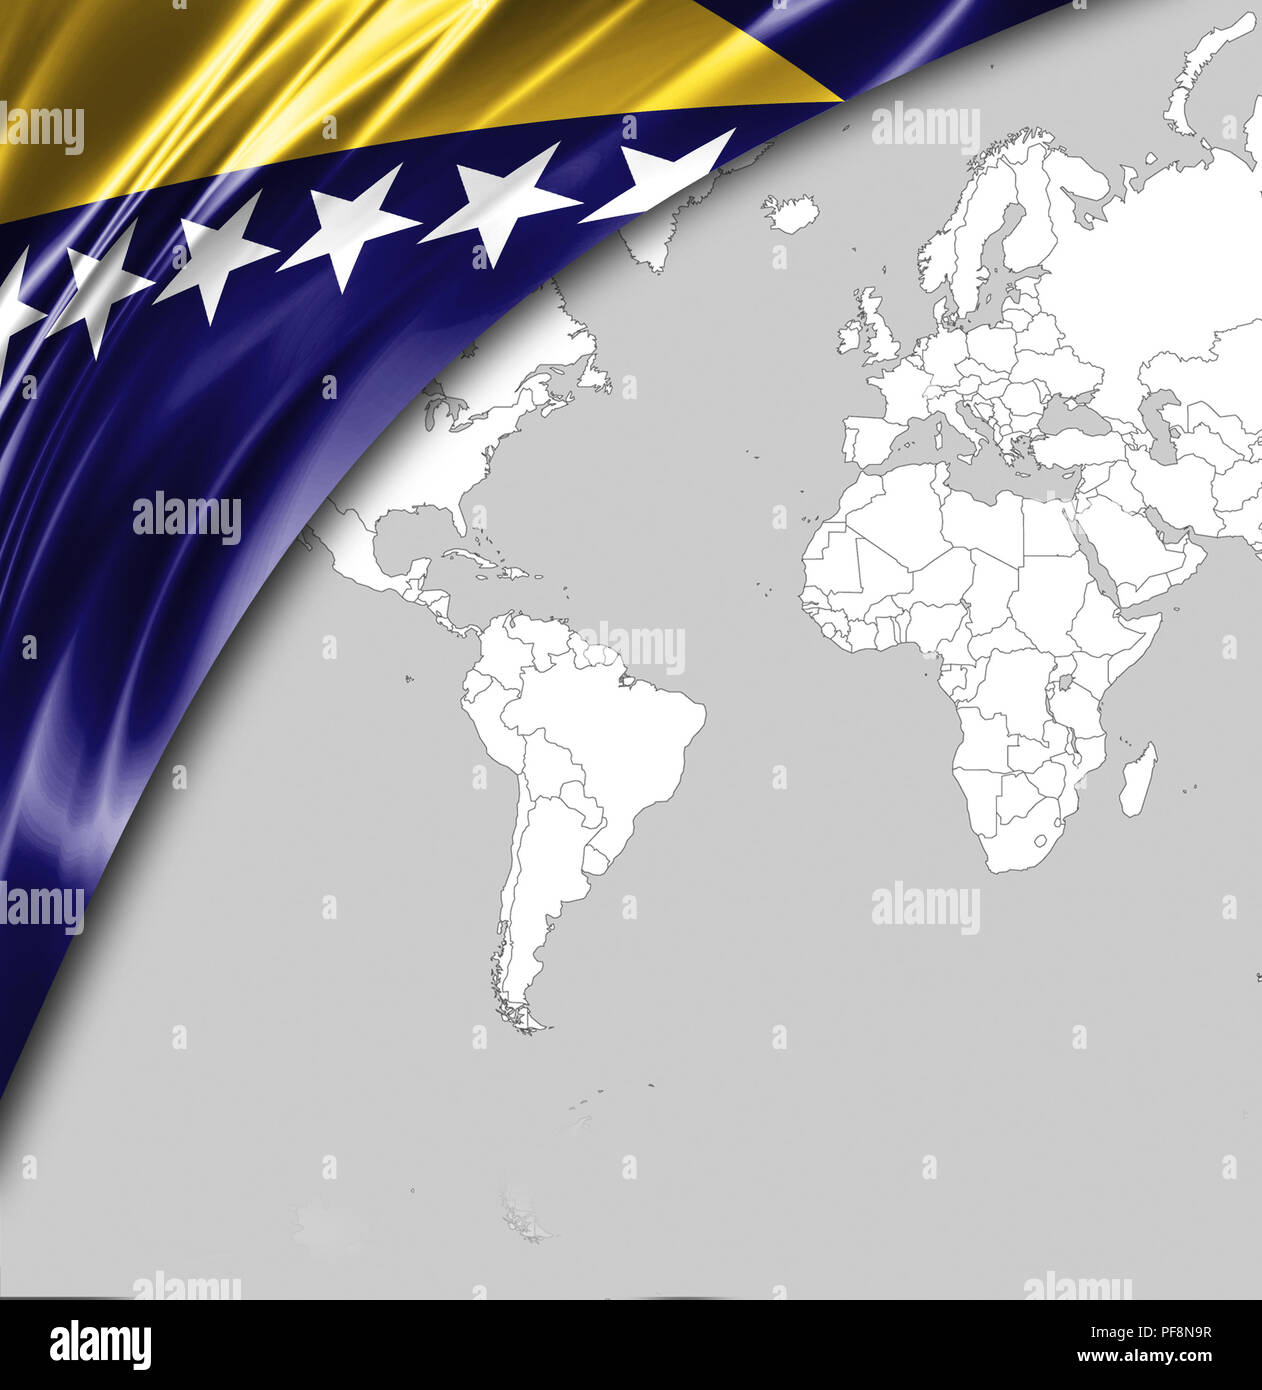 Flag of Bosnia and Herzegovina with a place for your text, in the background a world map. Stock Photo